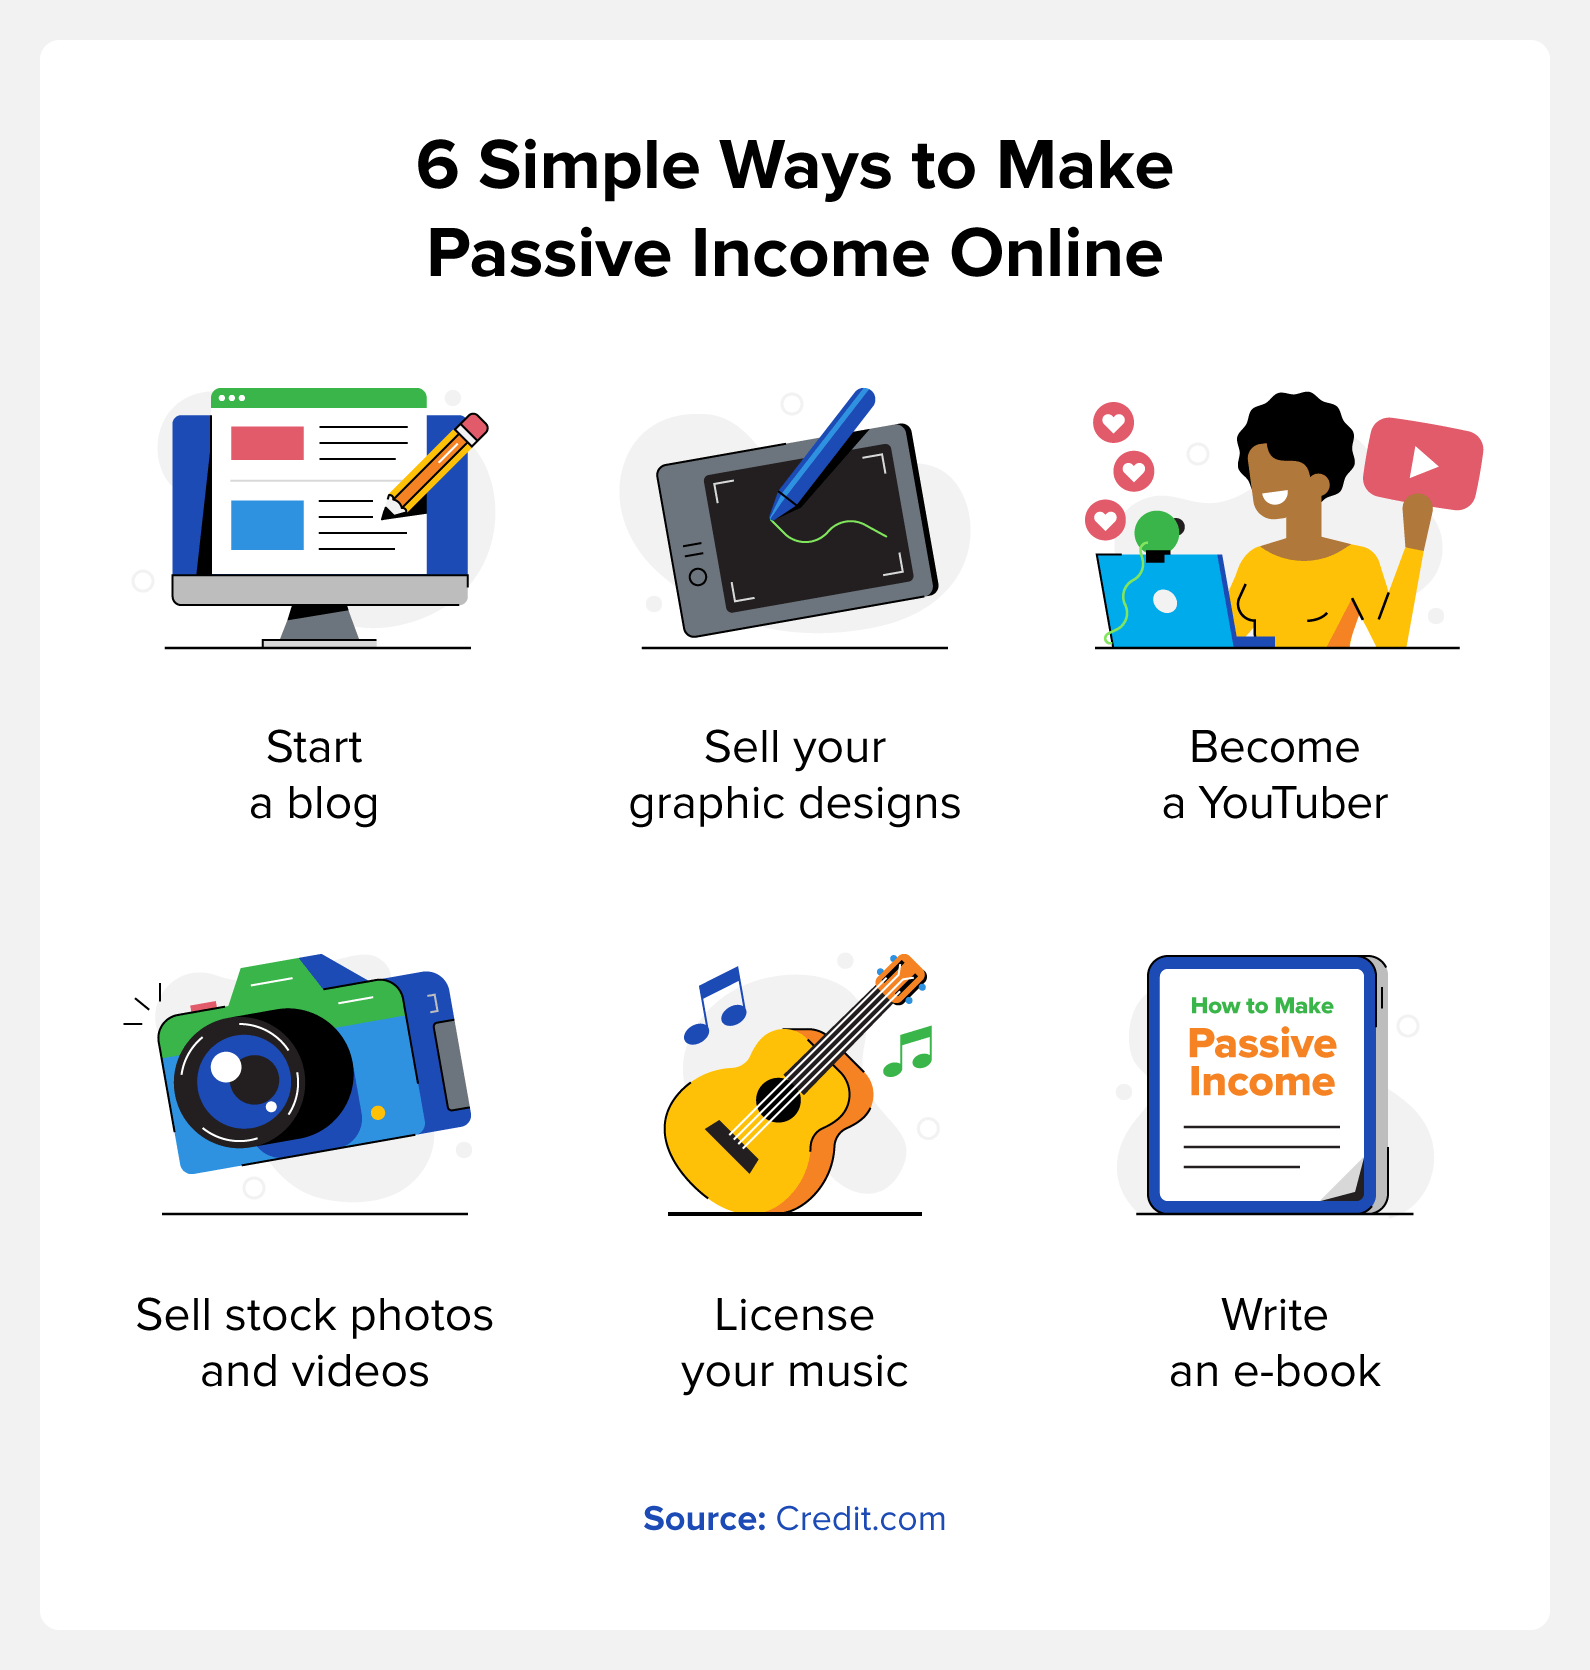 6 simple ways to make passive income online